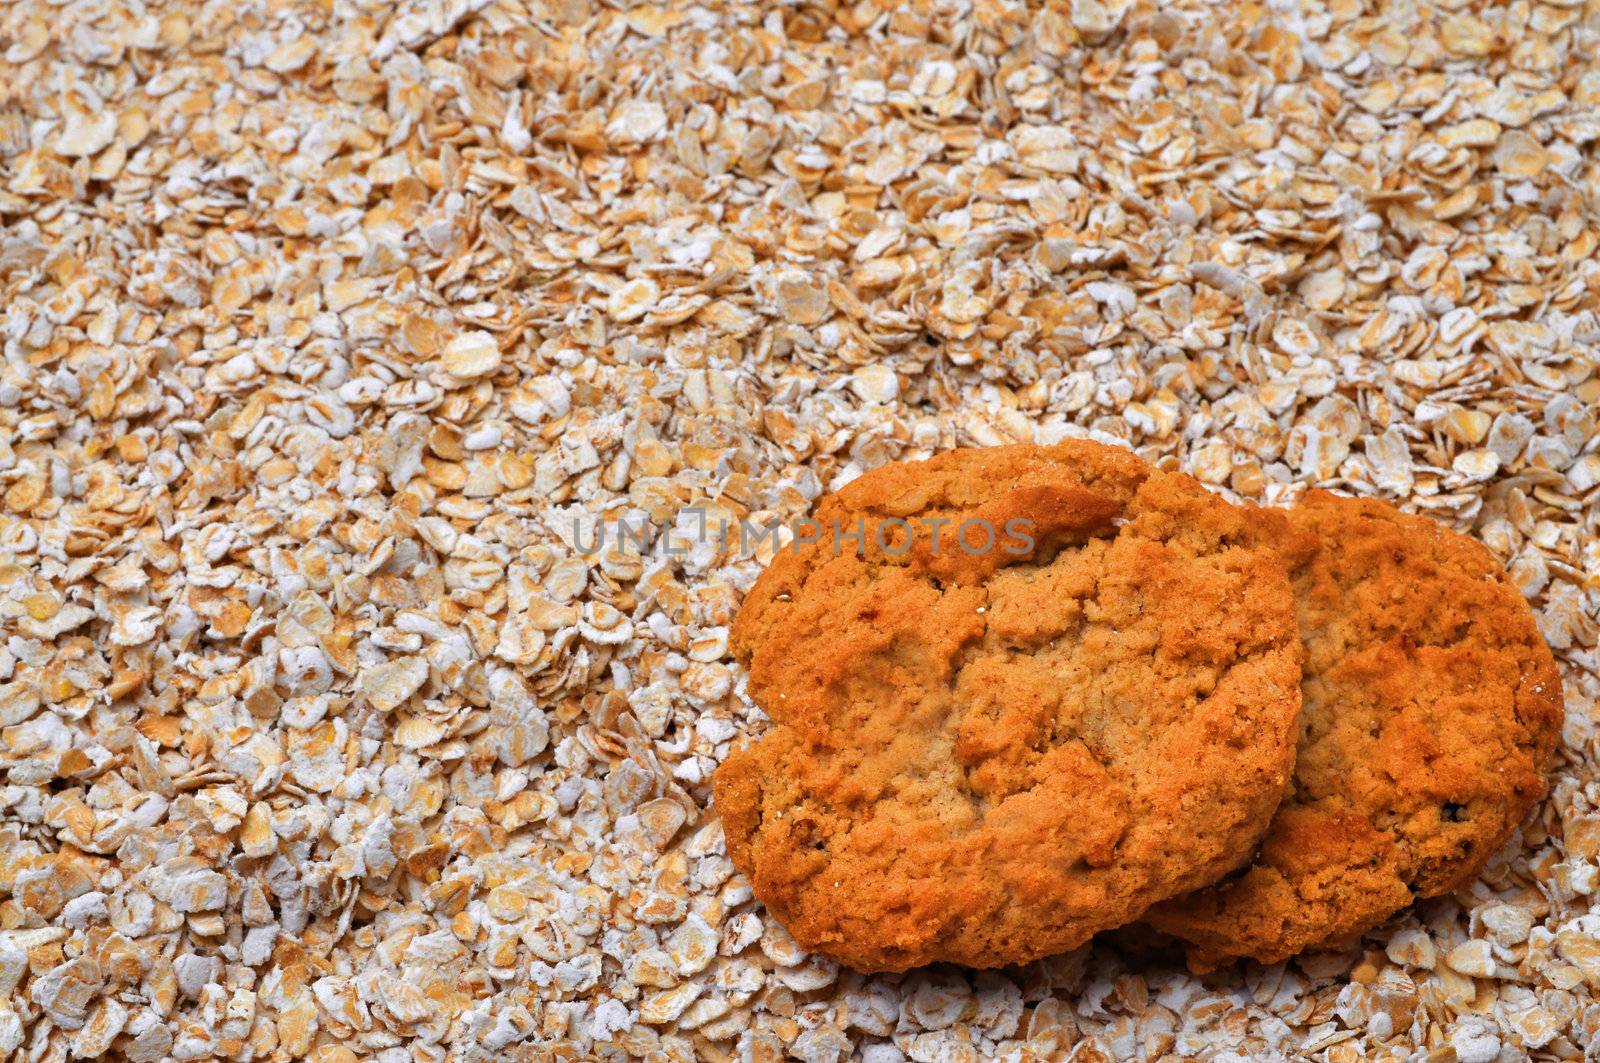 Two oatmeal cookies on bed of oatmeal with copy space.